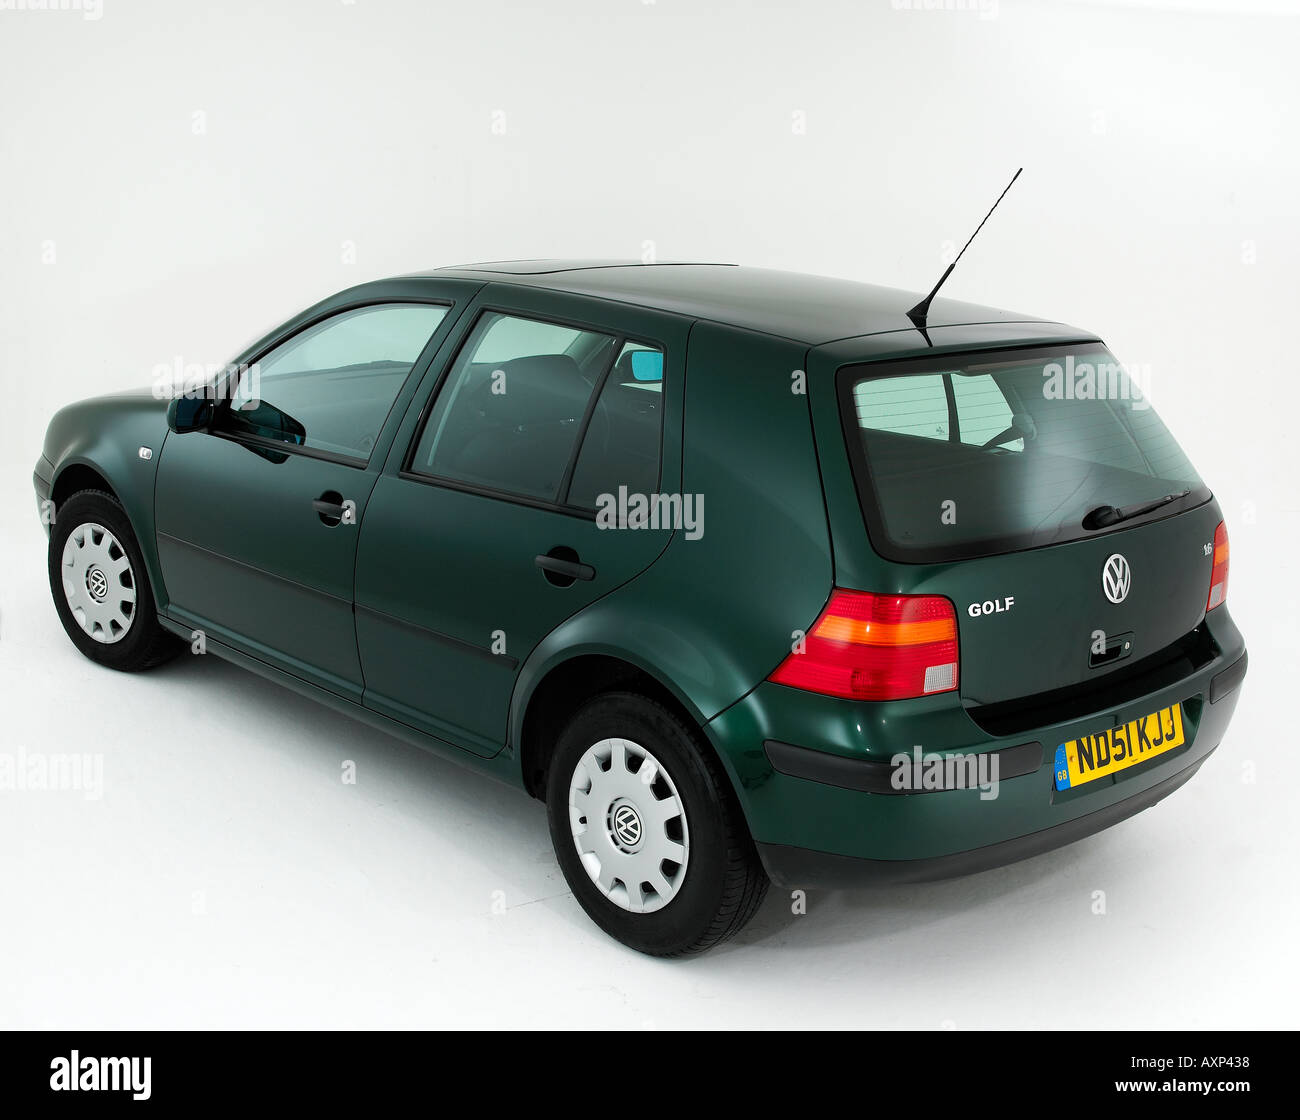 Vw Golf 1 High Resolution Stock Photography and Images - Alamy